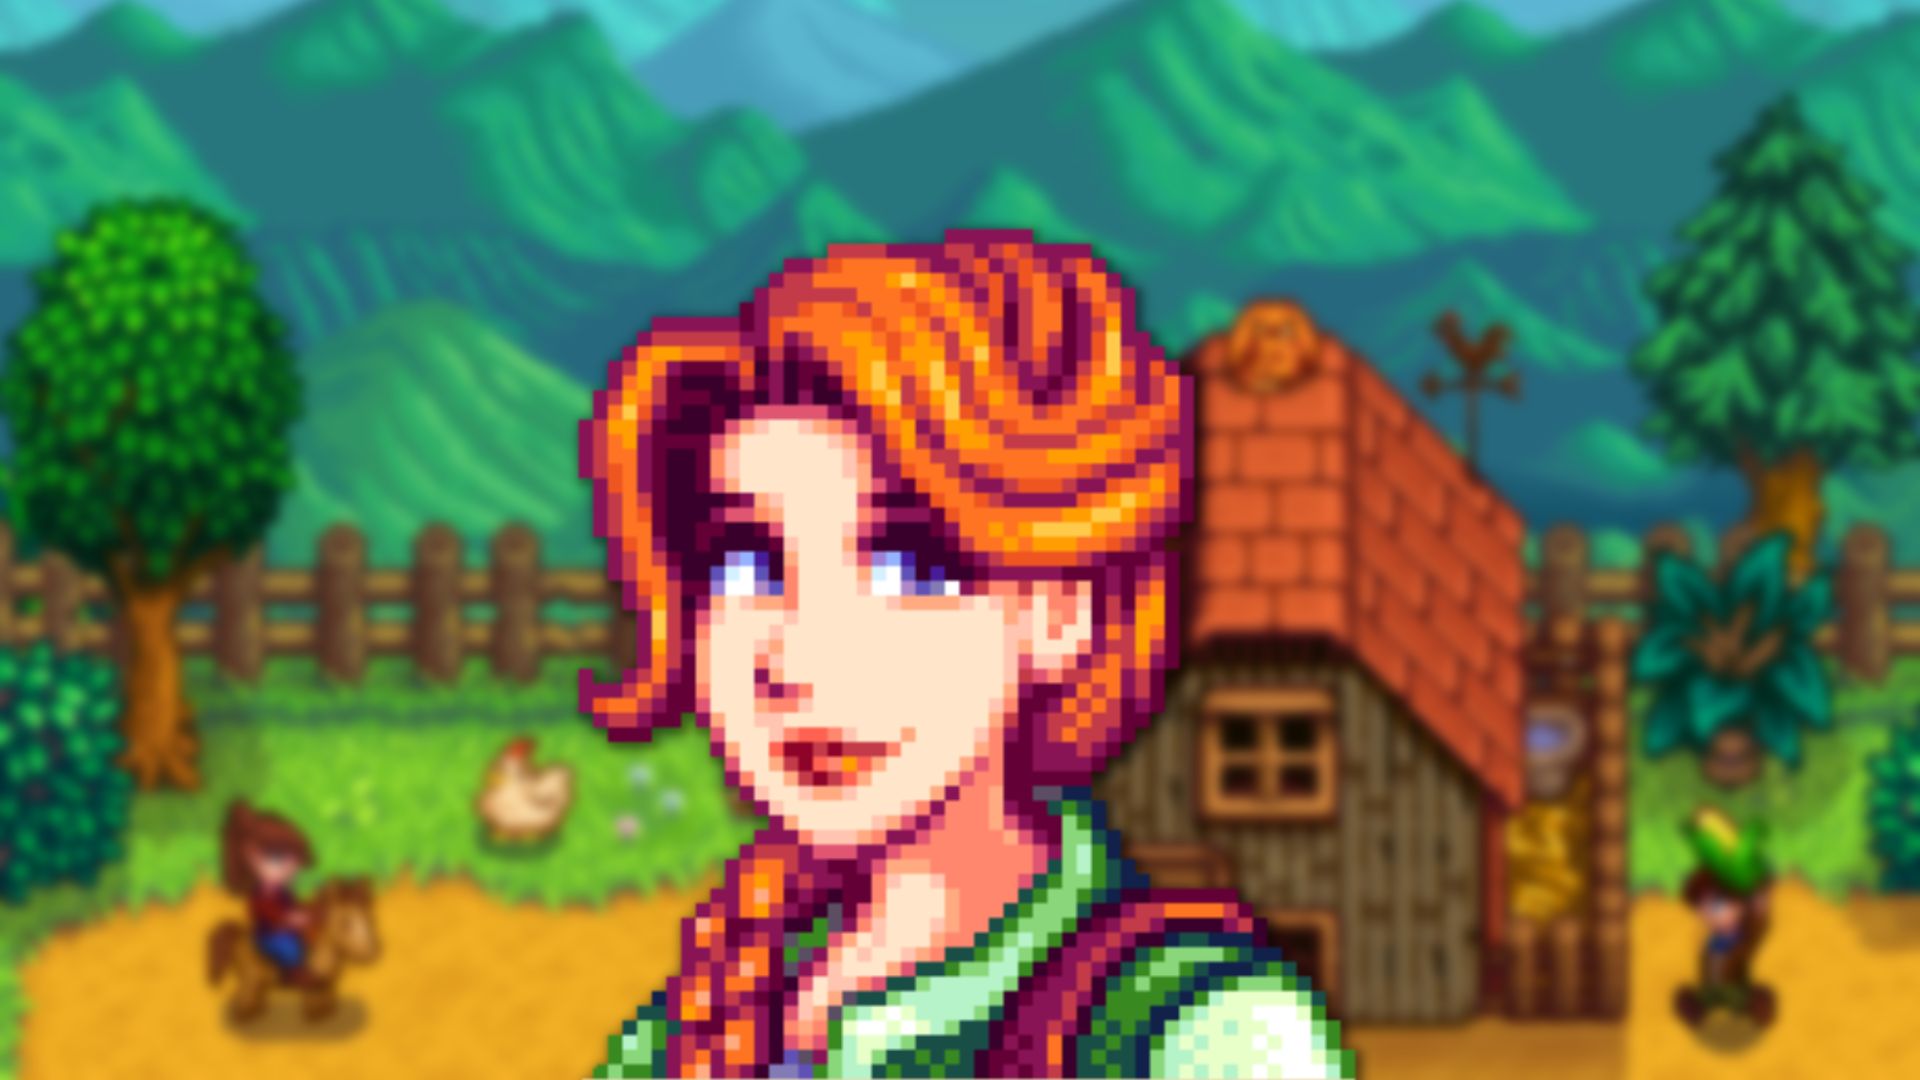 Stardew Valley Leah gifts, schedule, heart events, and questions